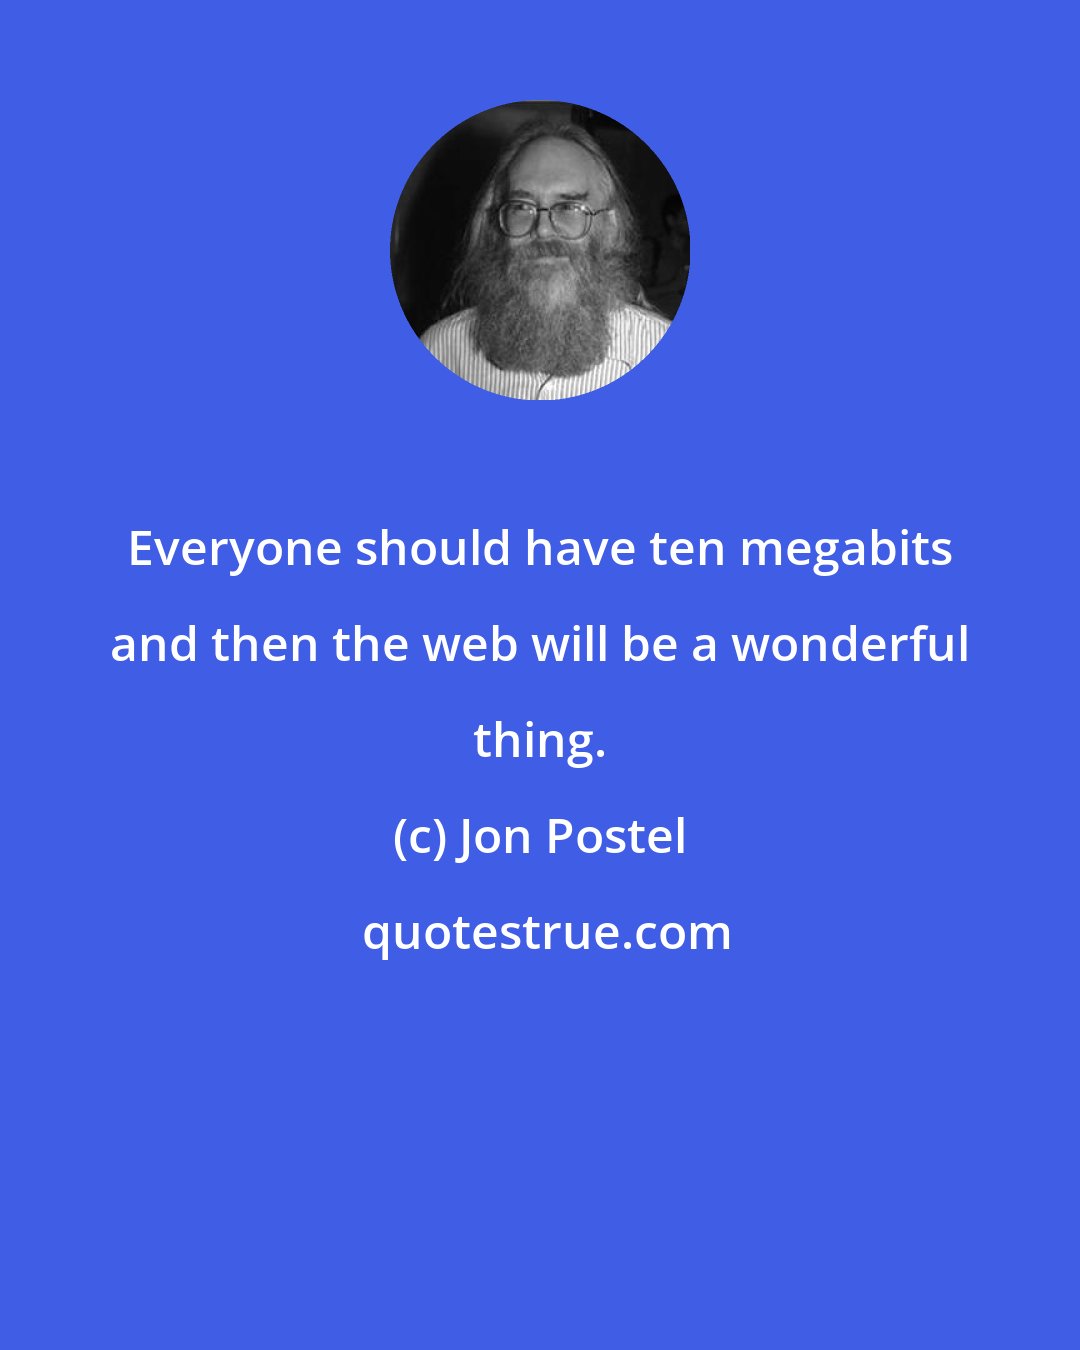 Jon Postel: Everyone should have ten megabits and then the web will be a wonderful thing.